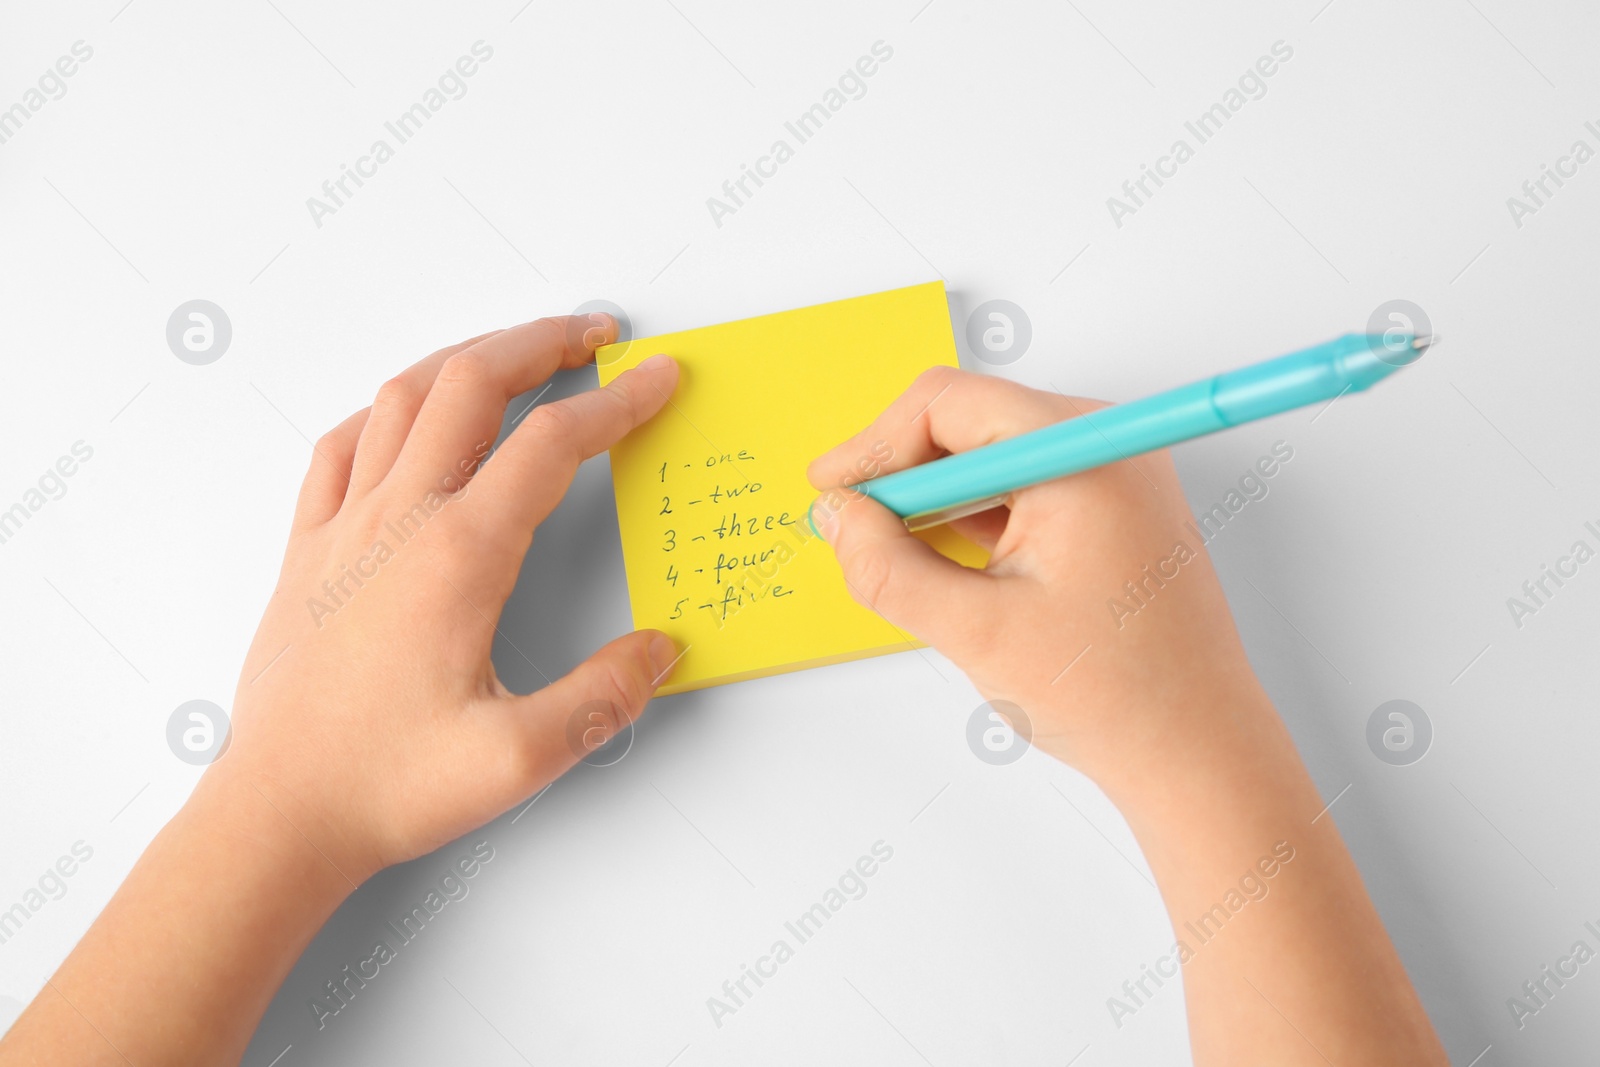 Photo of Child erasing words and numbers written with erasable pen on white background, top view